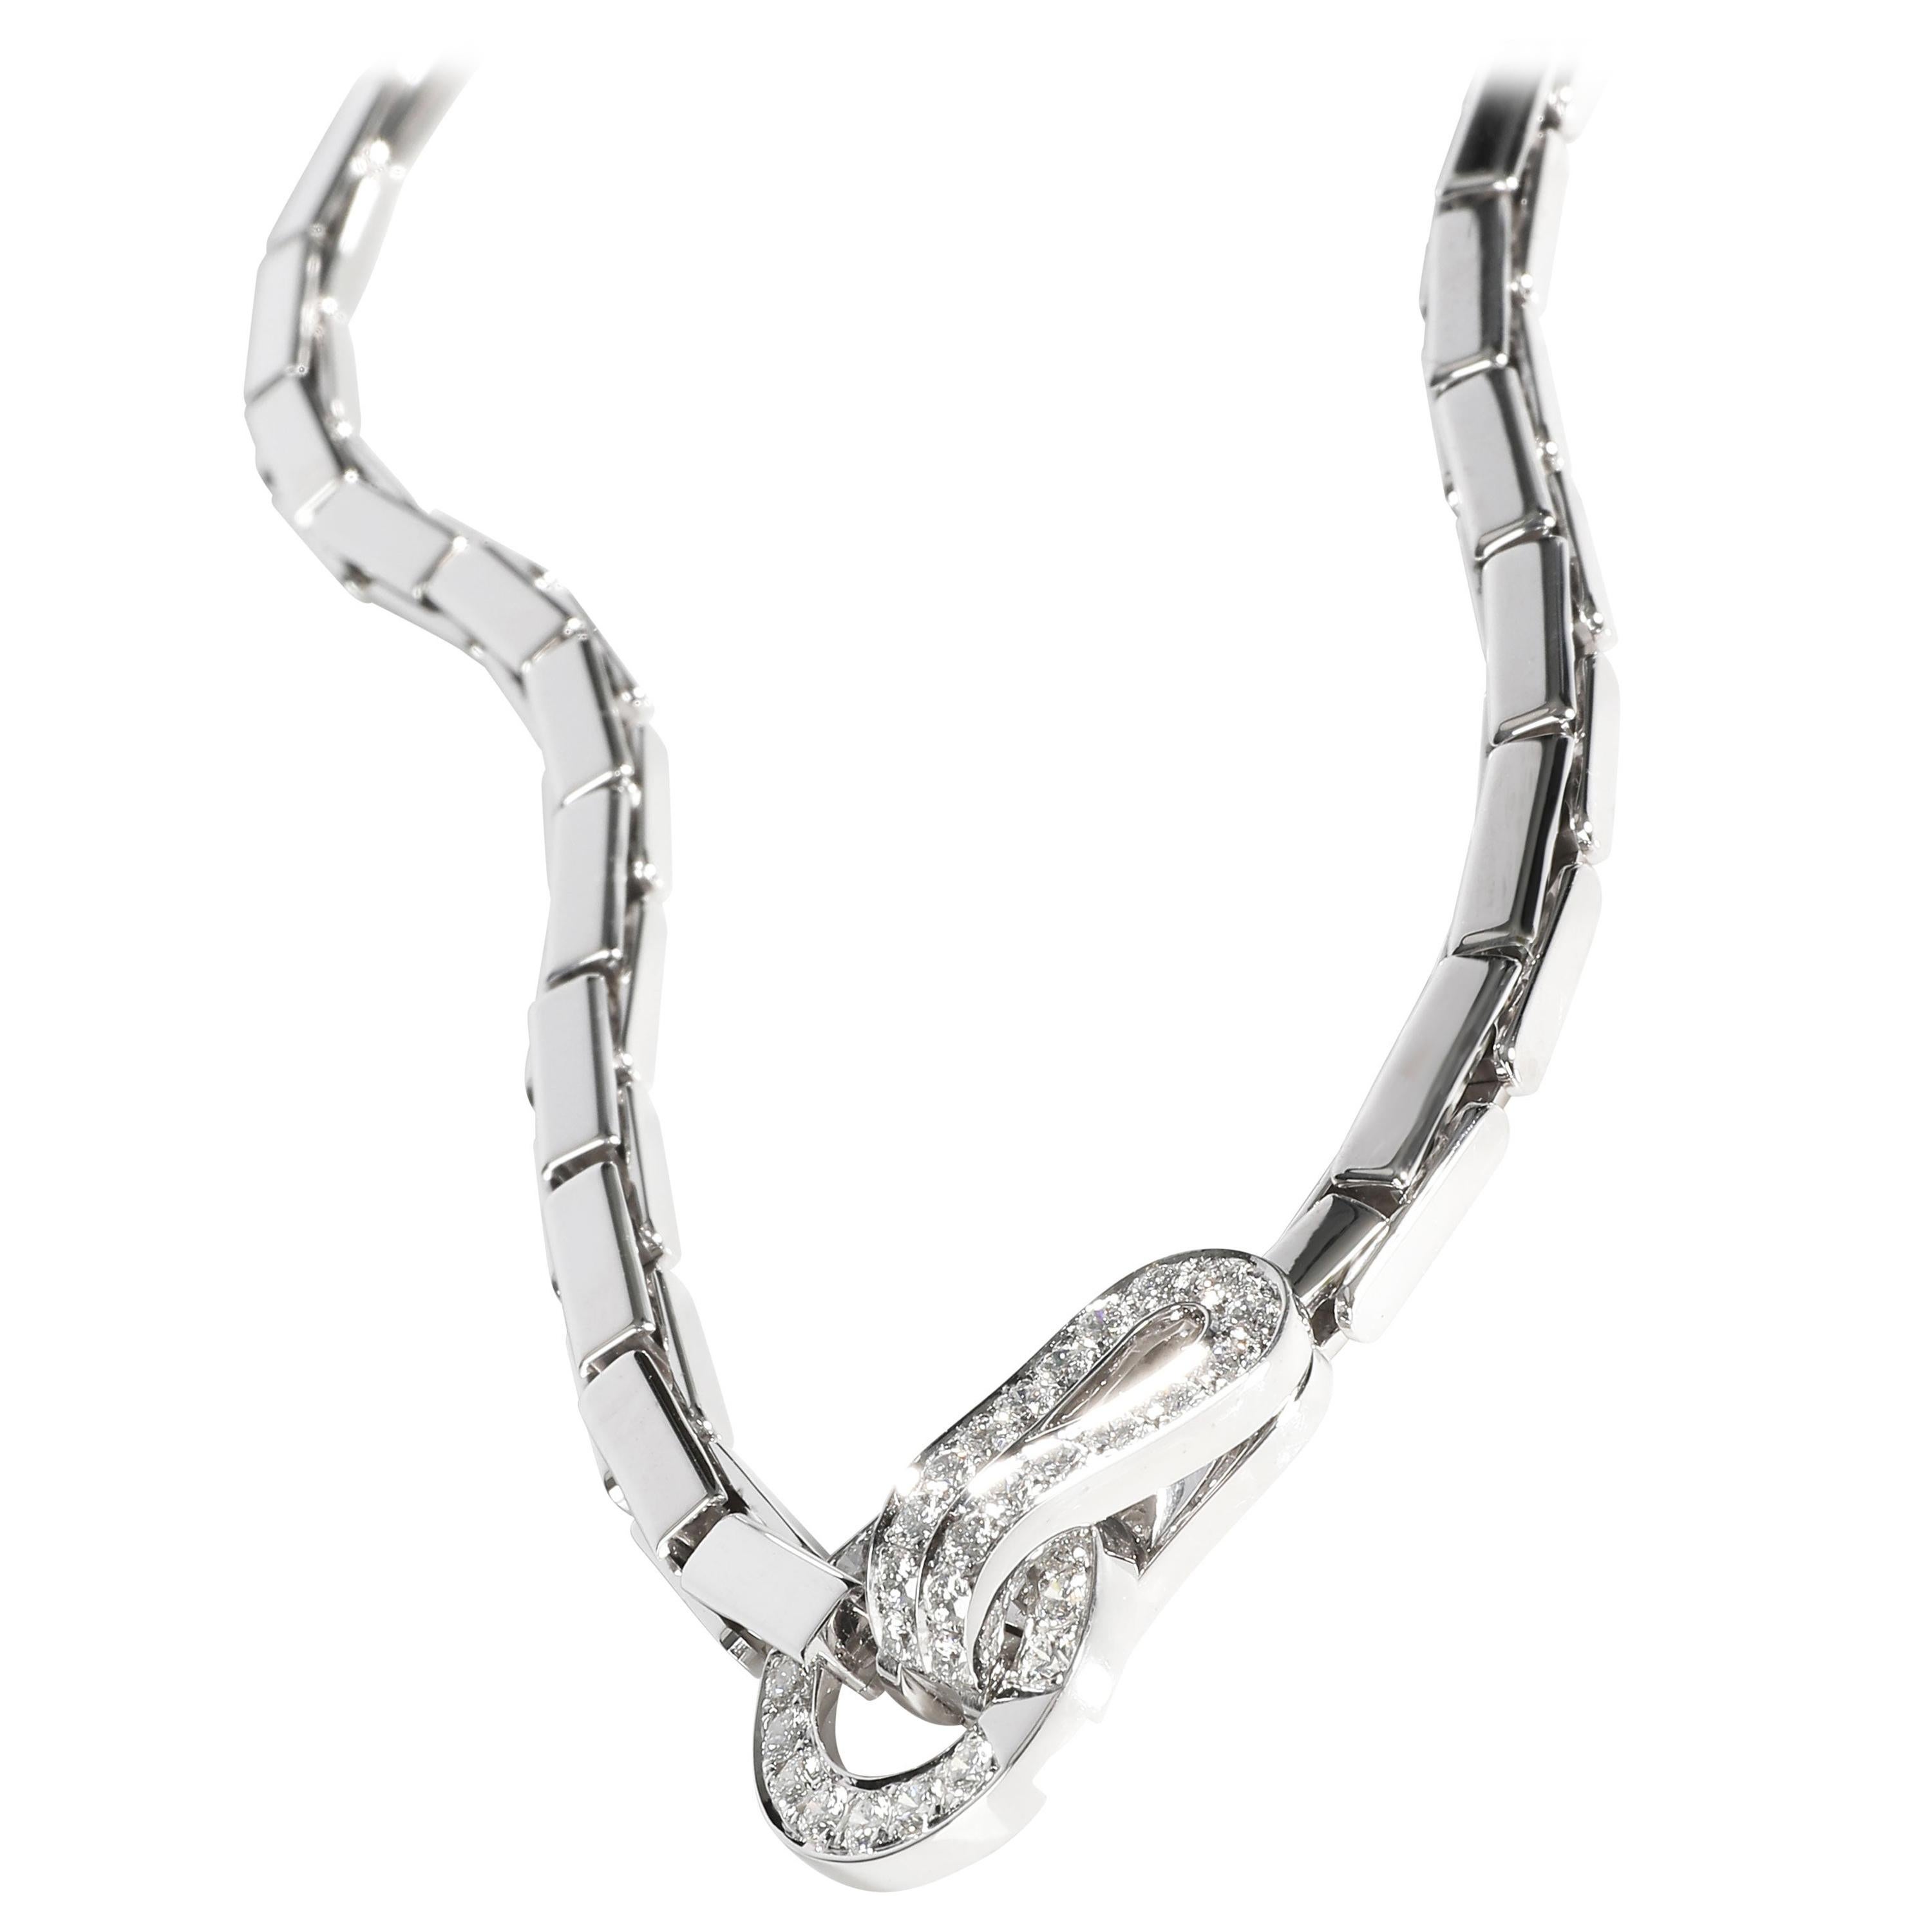 Cartier Agrafe Diamond Necklace in 18k White Gold 1.10 CTW